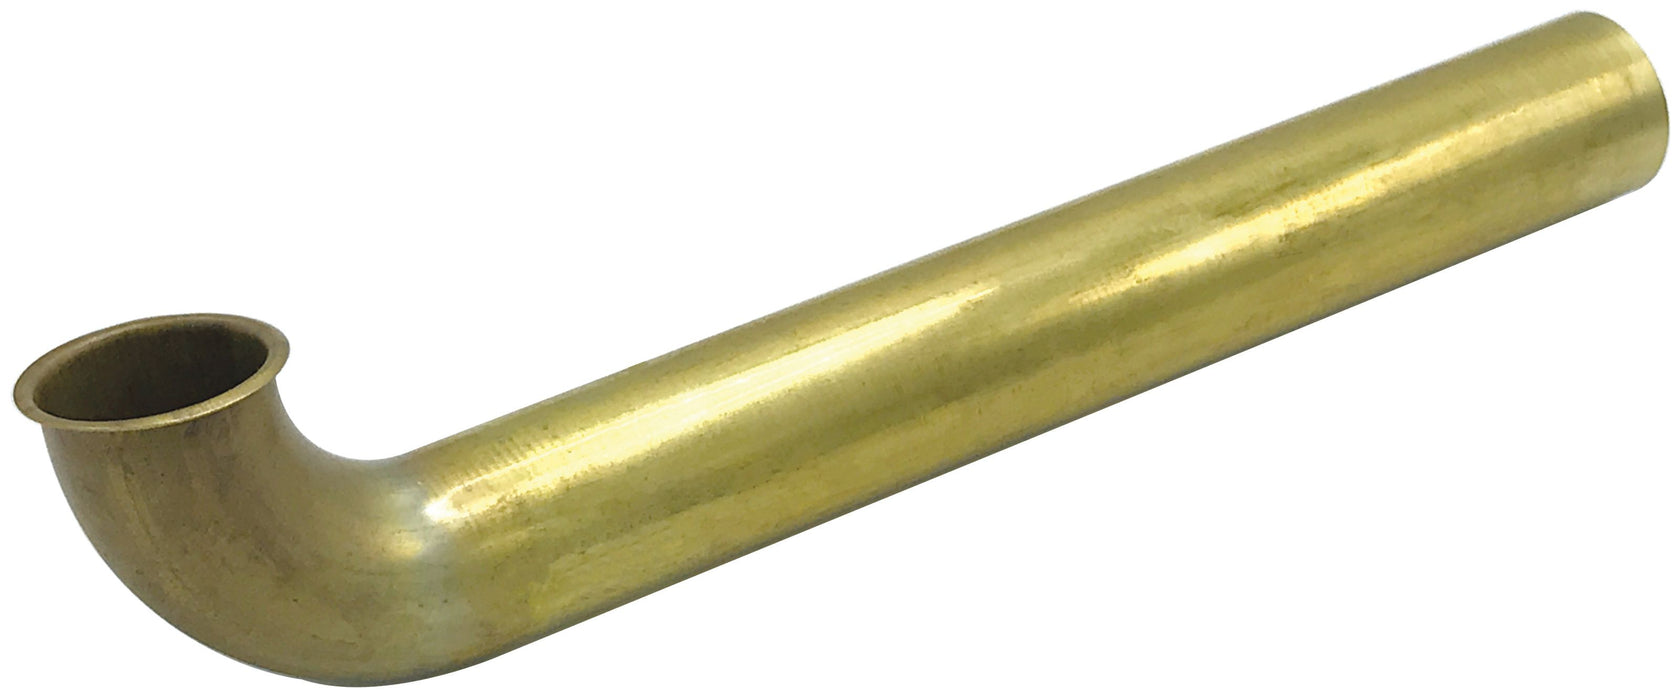 1 1/2" X 24" Rough Brass Direct Connection Waste Bend